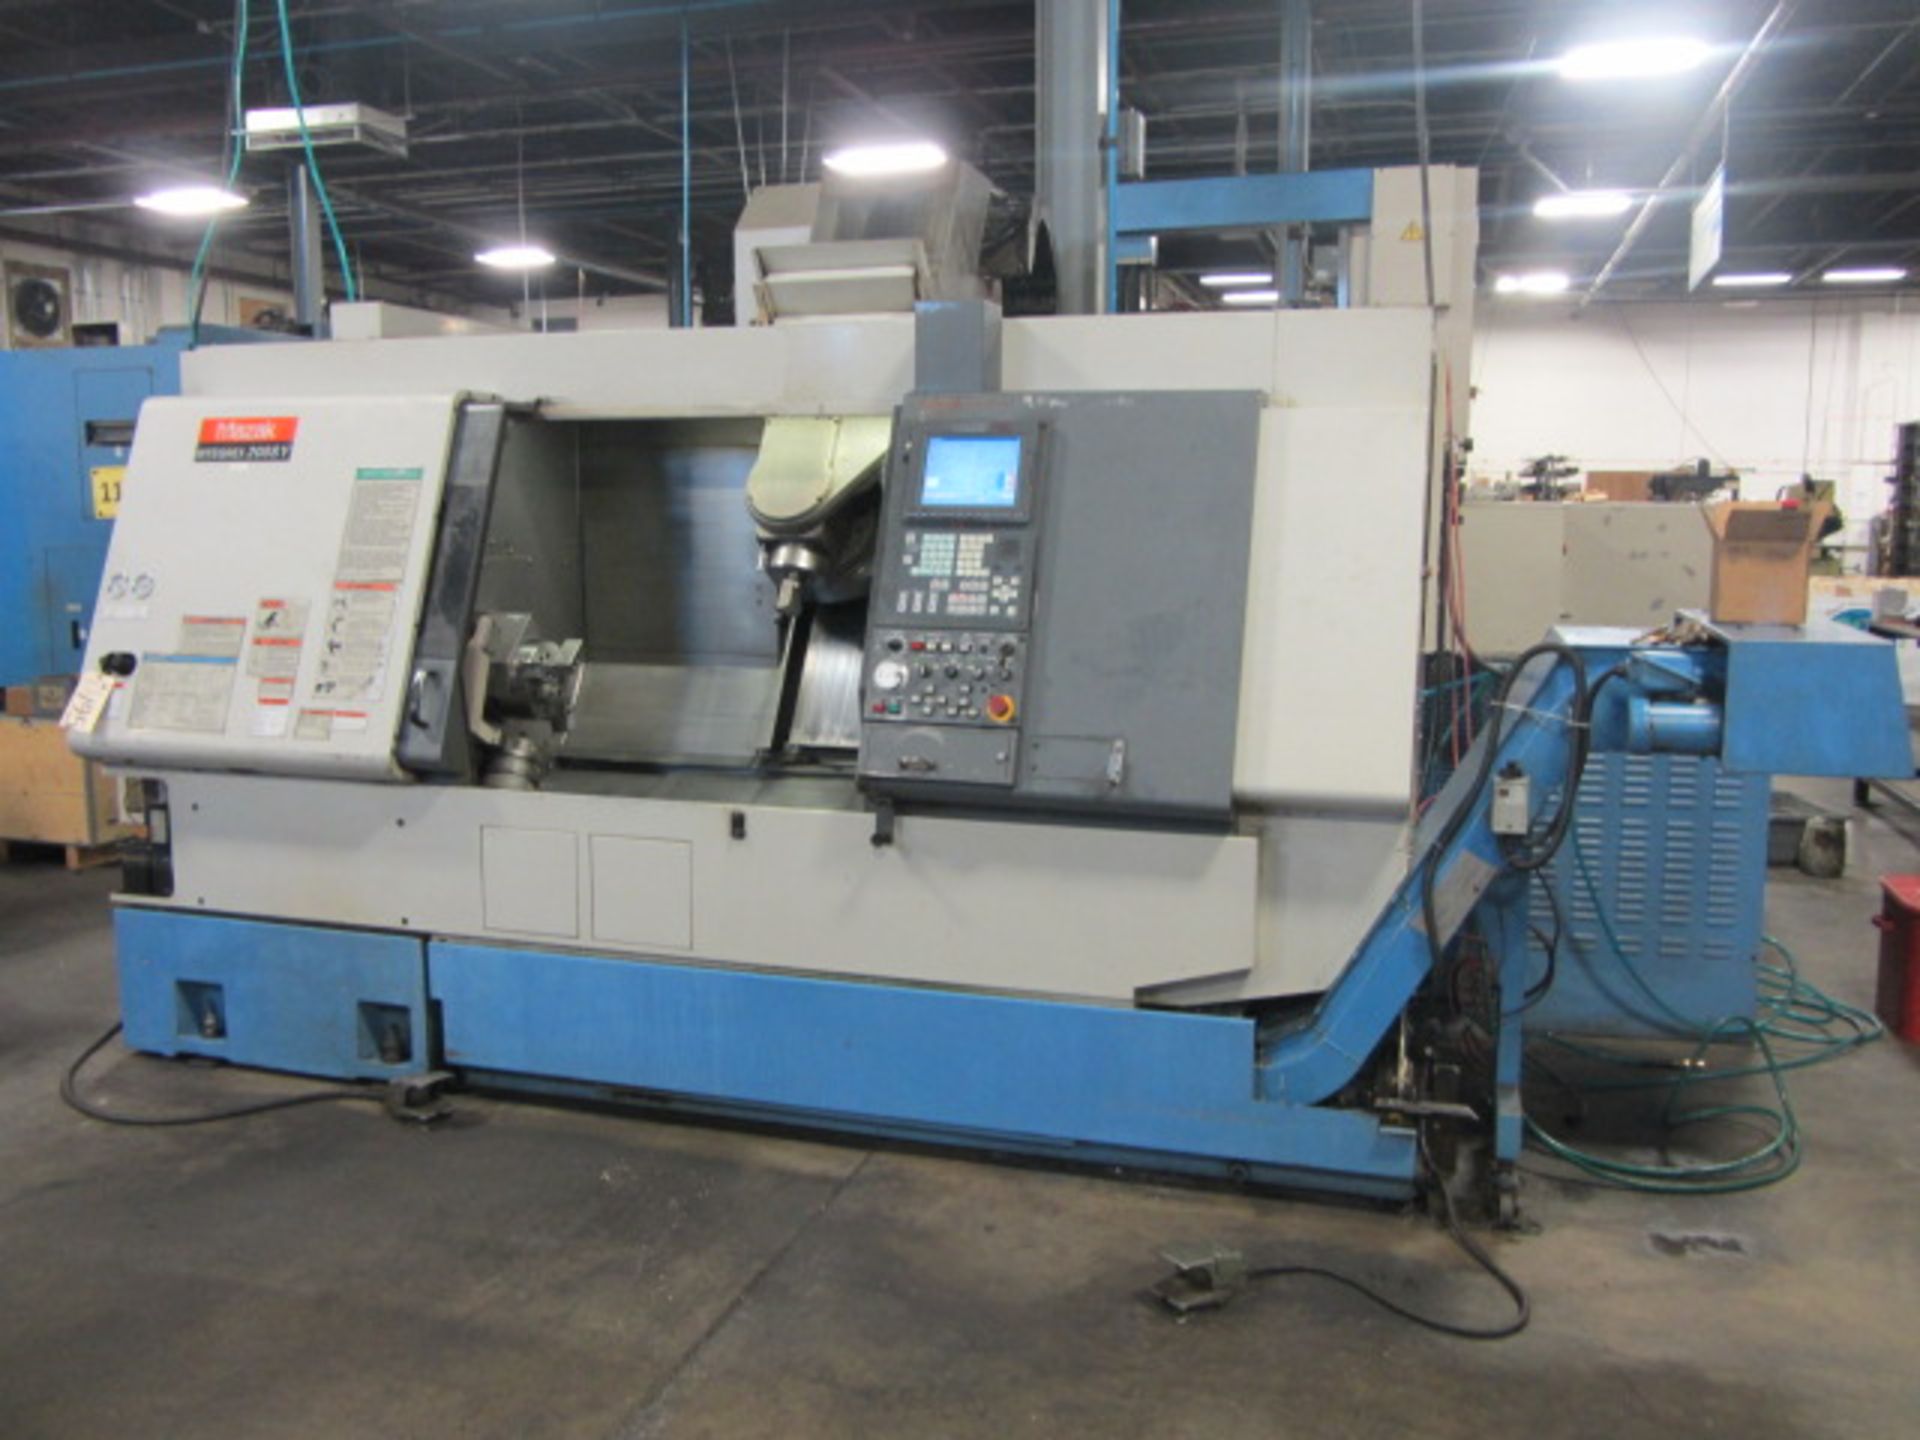 Mazak Integrex 200SY CNC Turning Center with Sub-Spindle, Milling & Y-Axis, 8'' Chuck on Main